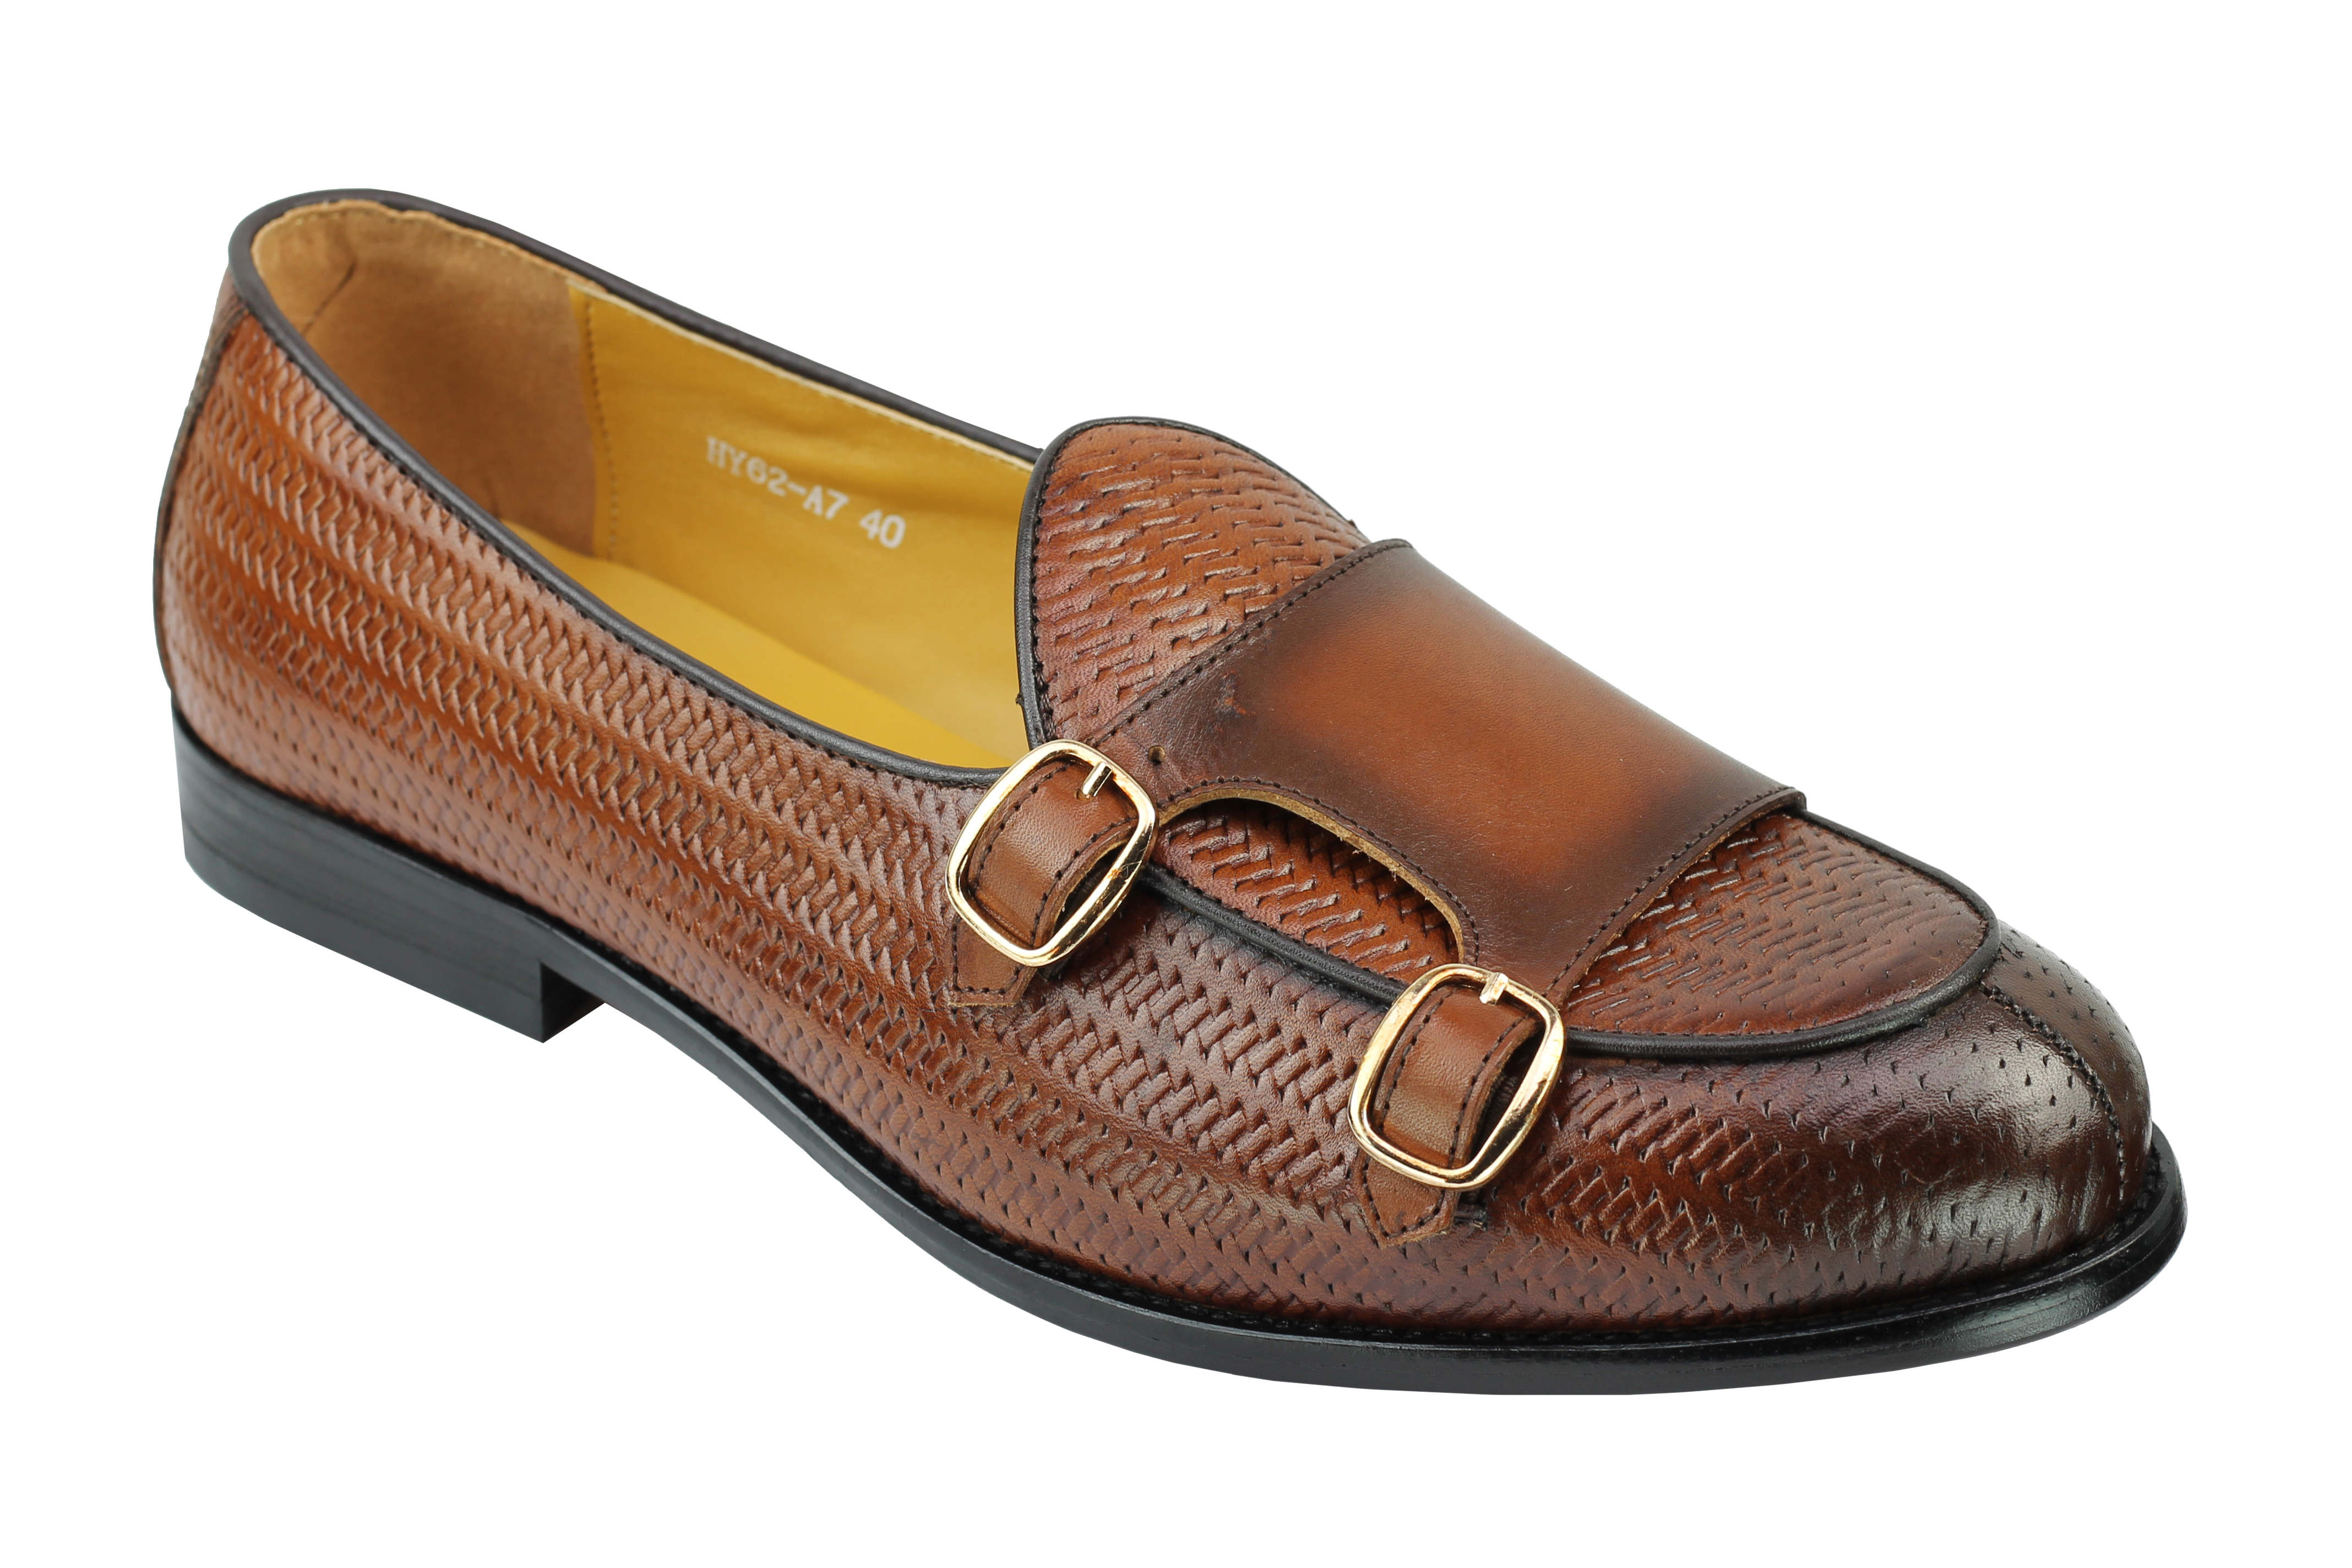 Real Leather Double Monk Strap Brown Loafer